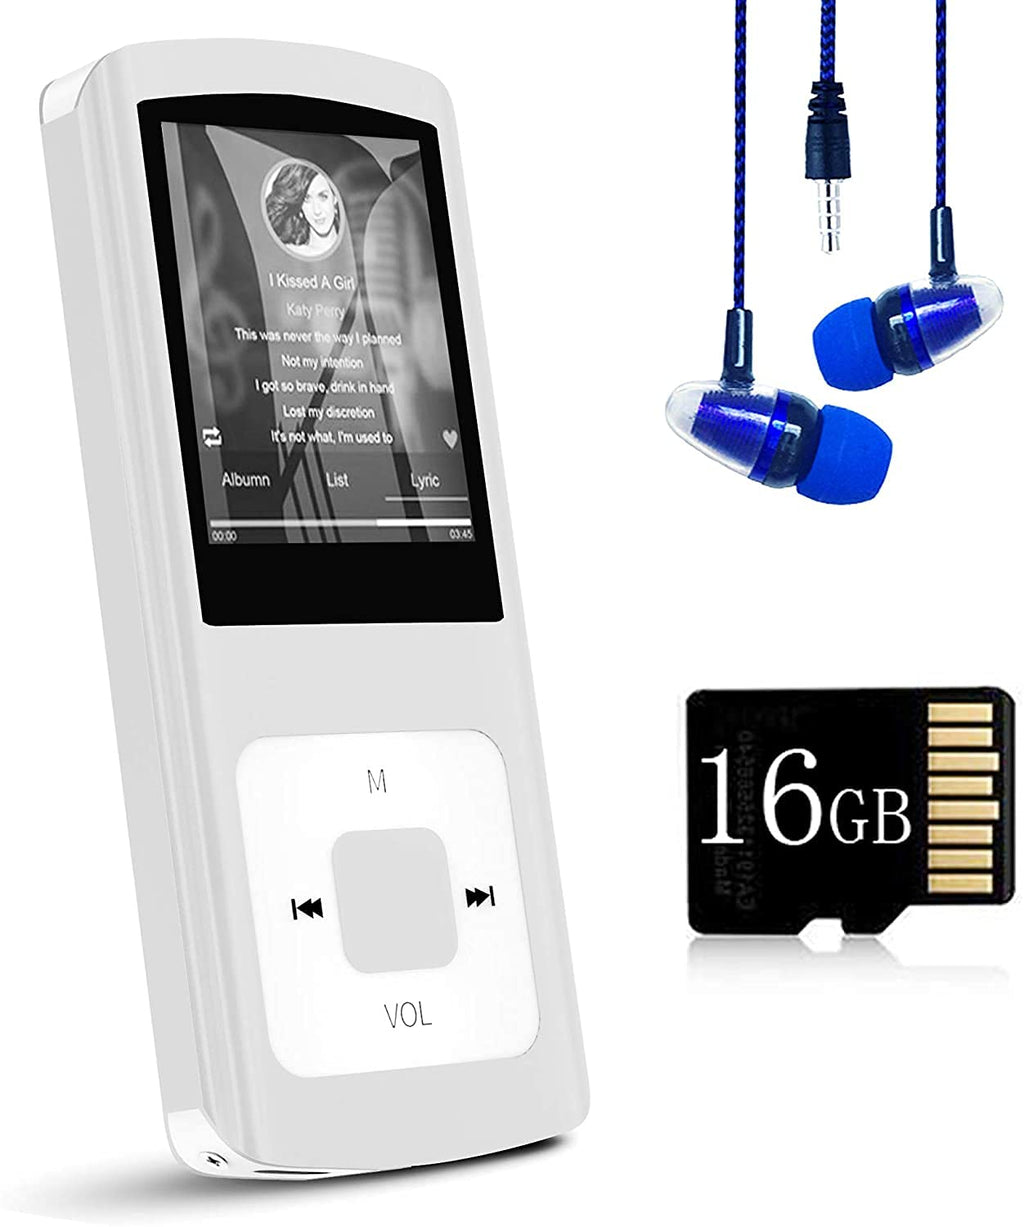  [AUSTRALIA] - MP3 Player, Frehovy Music Player with 16GB Memory SD Card with Photo/Video Play/FM Radio/Voice Recorder/E-Book Reader